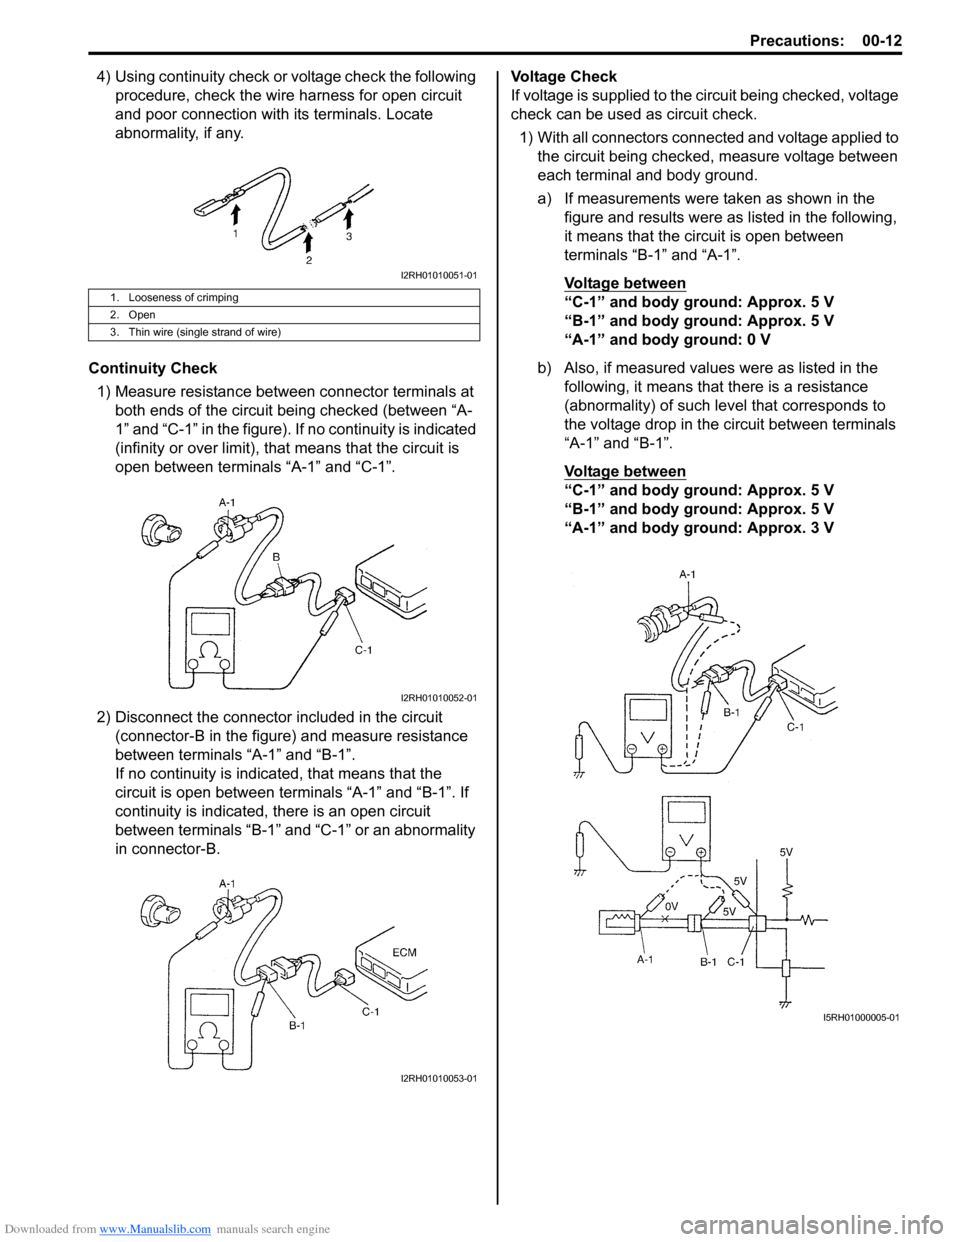 SUZUKI SWIFT 2007 2.G Service User Guide Downloaded from www.Manualslib.com manuals search engine Precautions: 00-12
4) Using continuity check or voltage check the following procedure, check the wire harness for open circuit 
and poor connec